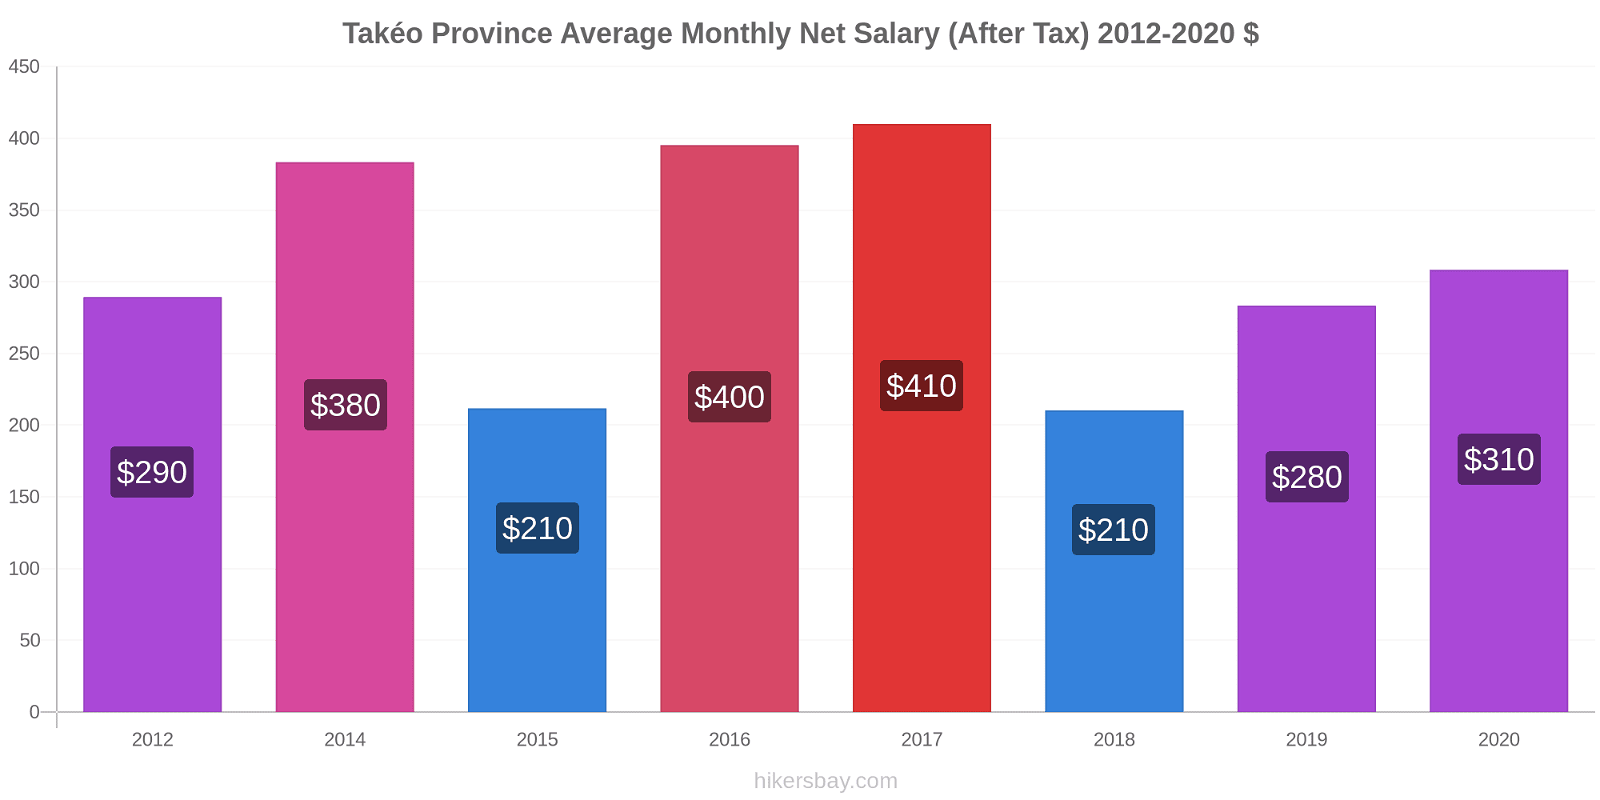 Takéo Province price changes Average Monthly Net Salary (After Tax) hikersbay.com